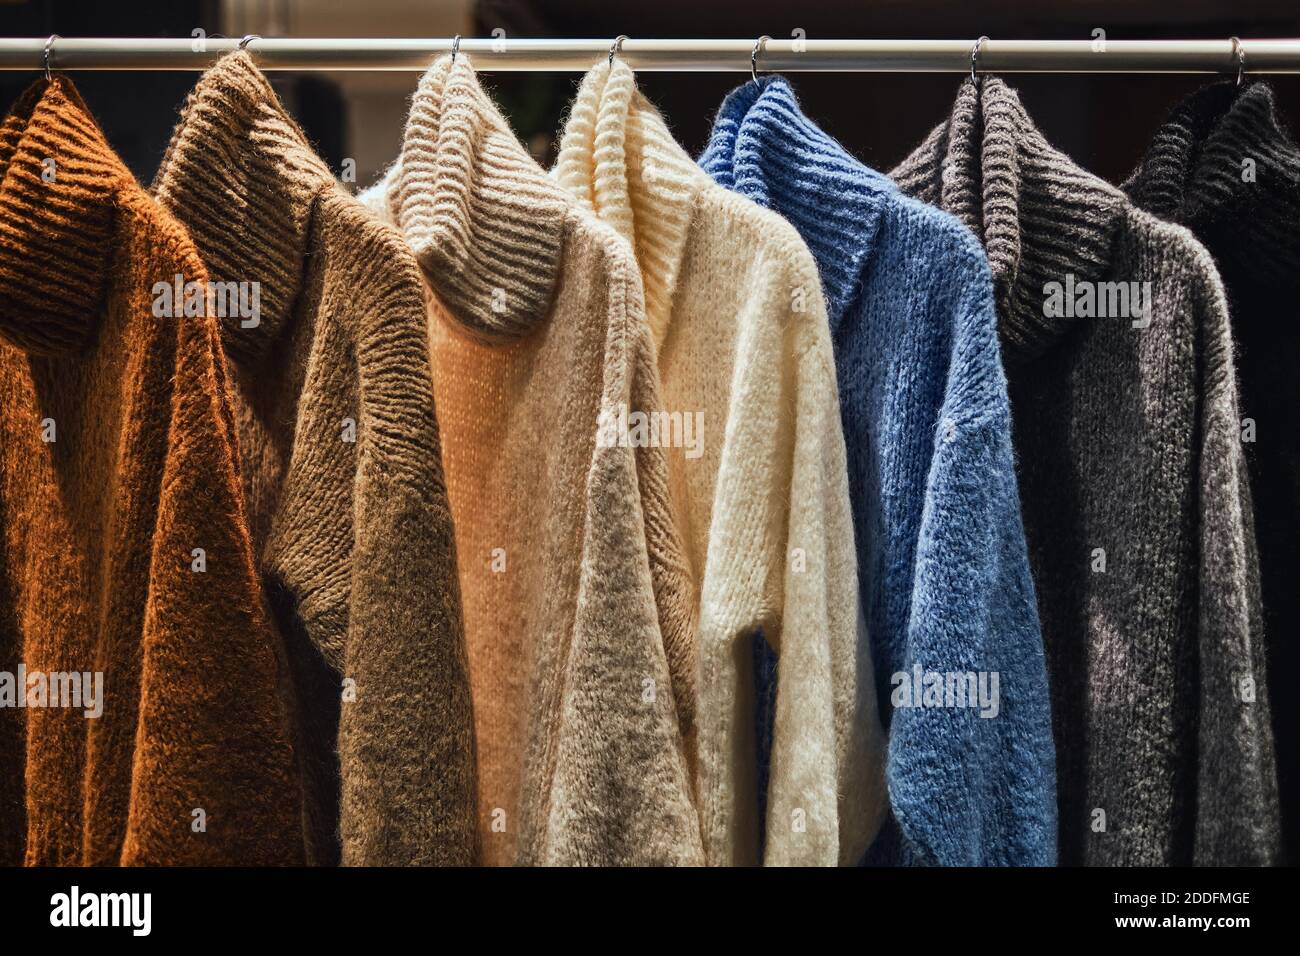 Knitted winter pullovers on a rack in a fashion store. Capsule wardrobe concept image of sweaters in cloths shop. Warm handmade wool sweaters. Stock Photo